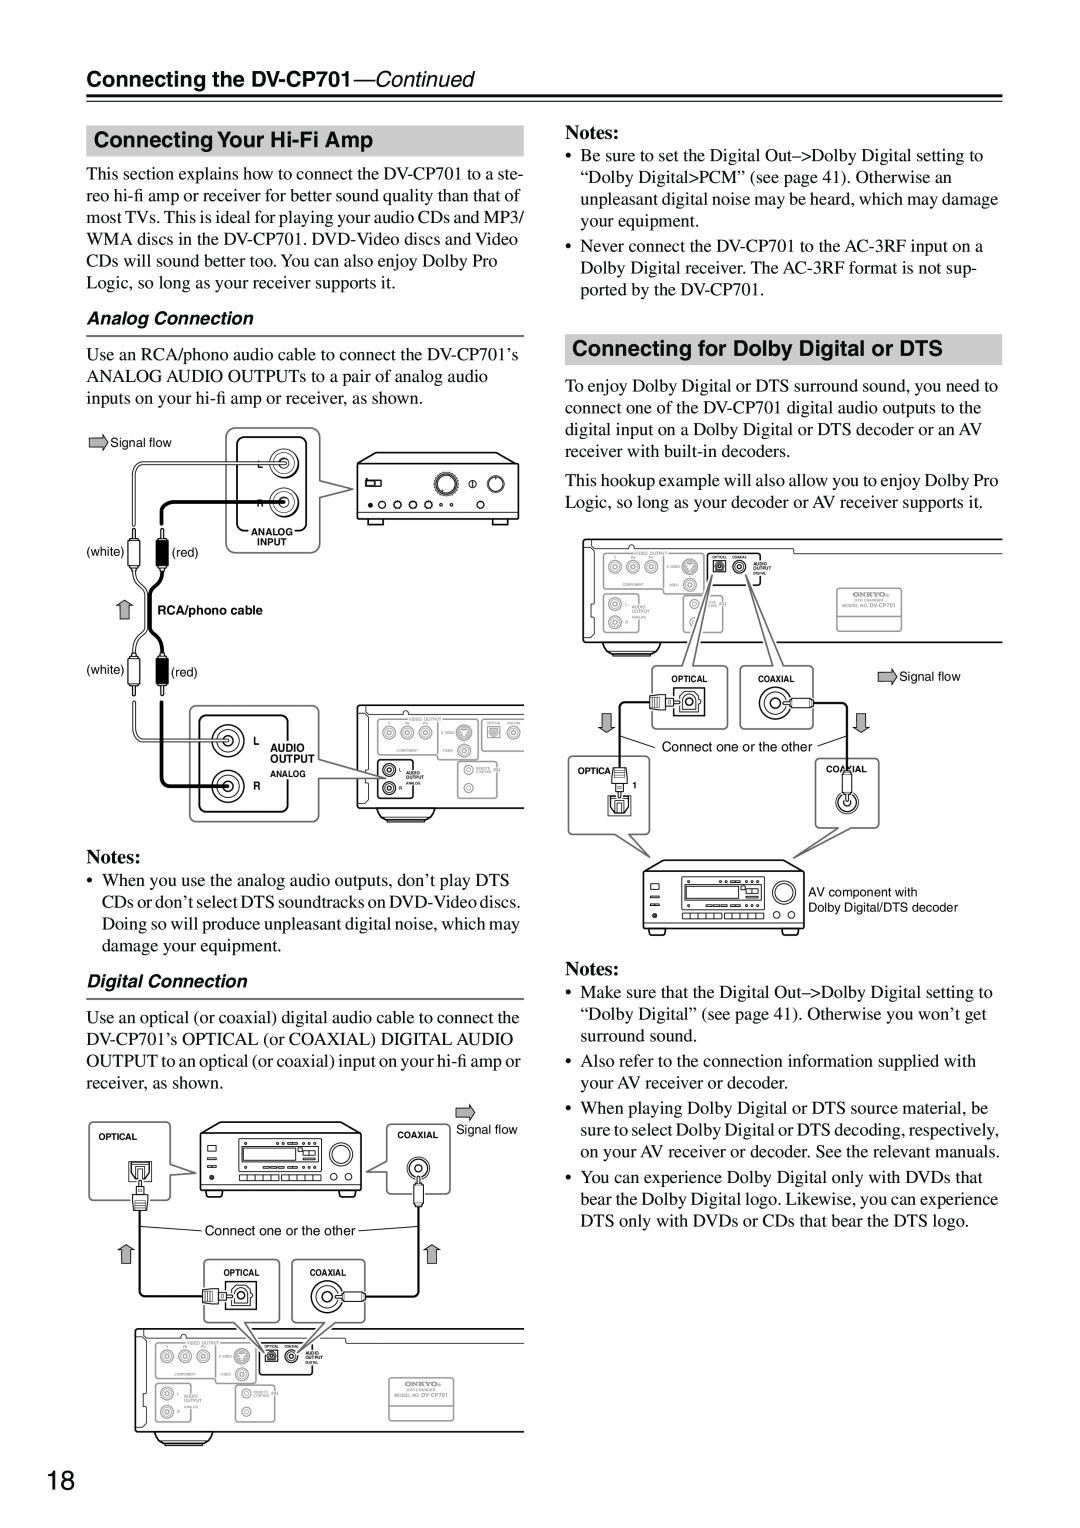 Onkyo DV-CP701 instruction manual Notes, Analog Connection, Digital Connection 